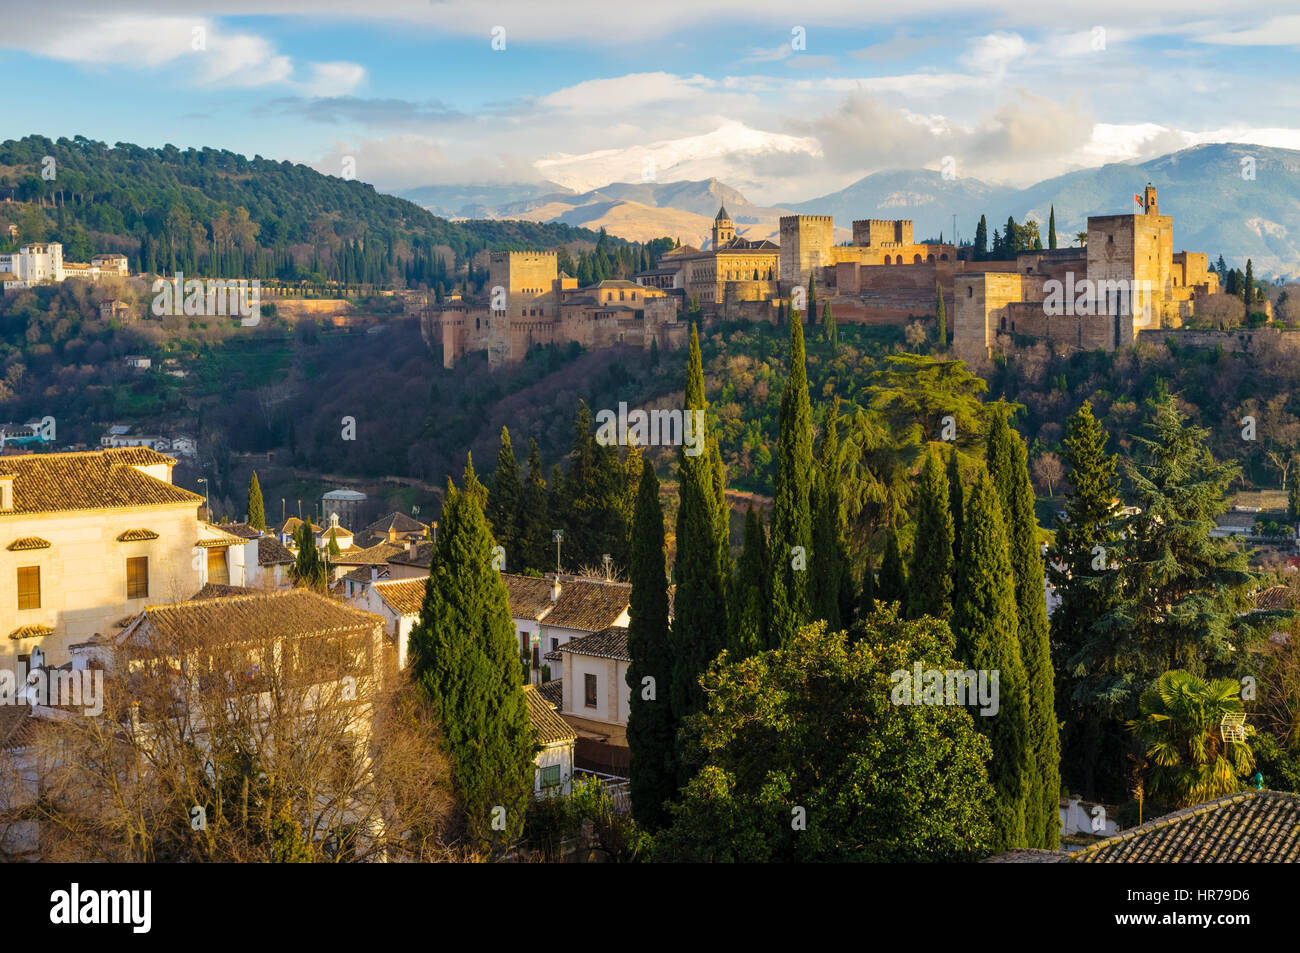 Alhambra palace and  Unesco listed Albaicin quarter at Granada, Andalusia, Spain Stock Photo